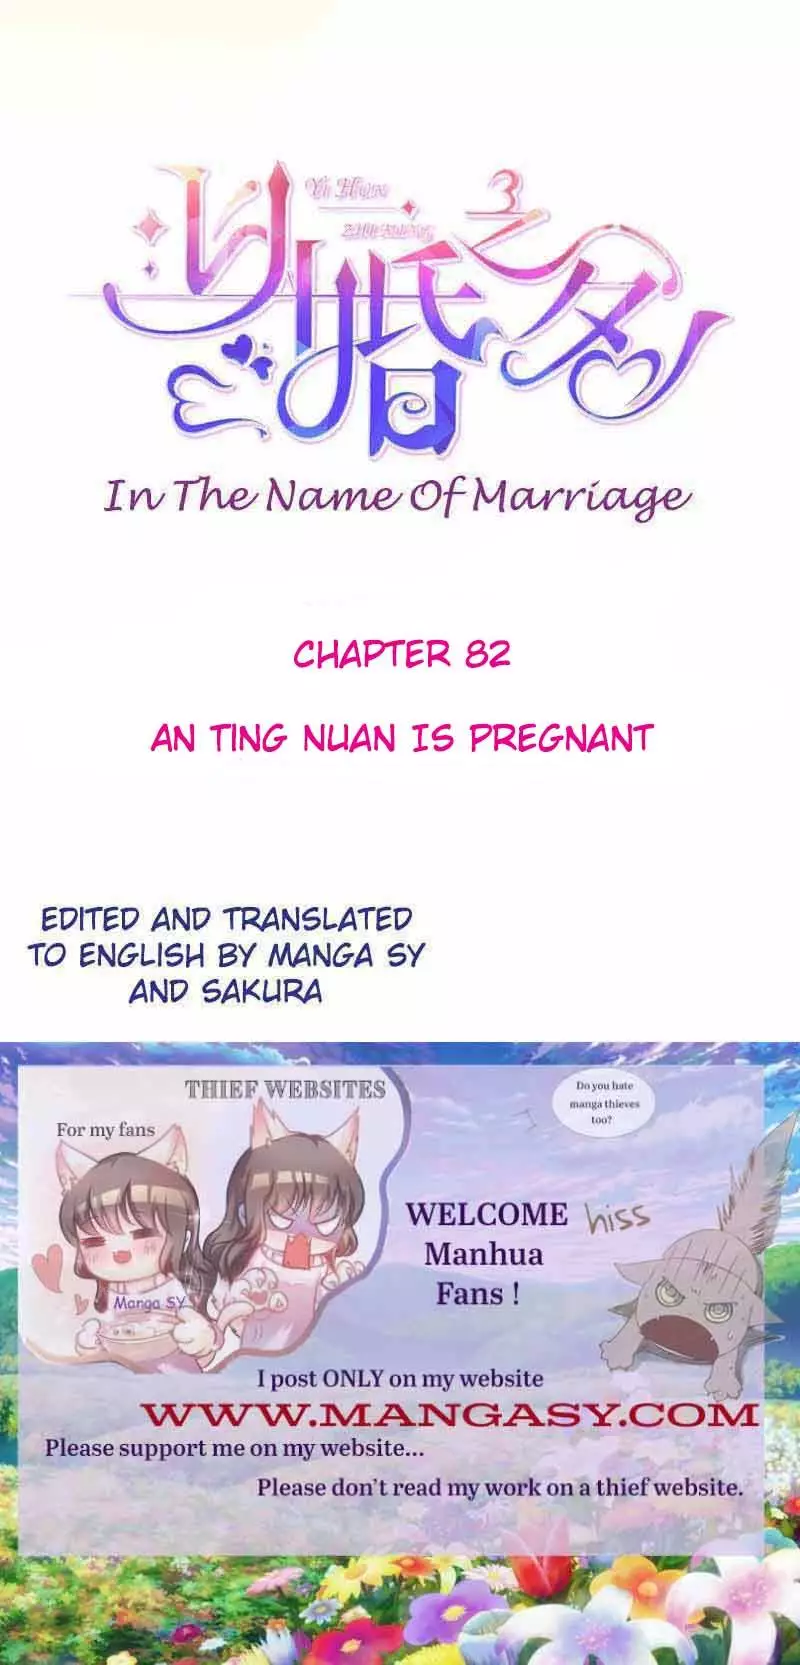 In The Name Of Marriage - 82 page 1-4d41aeaf